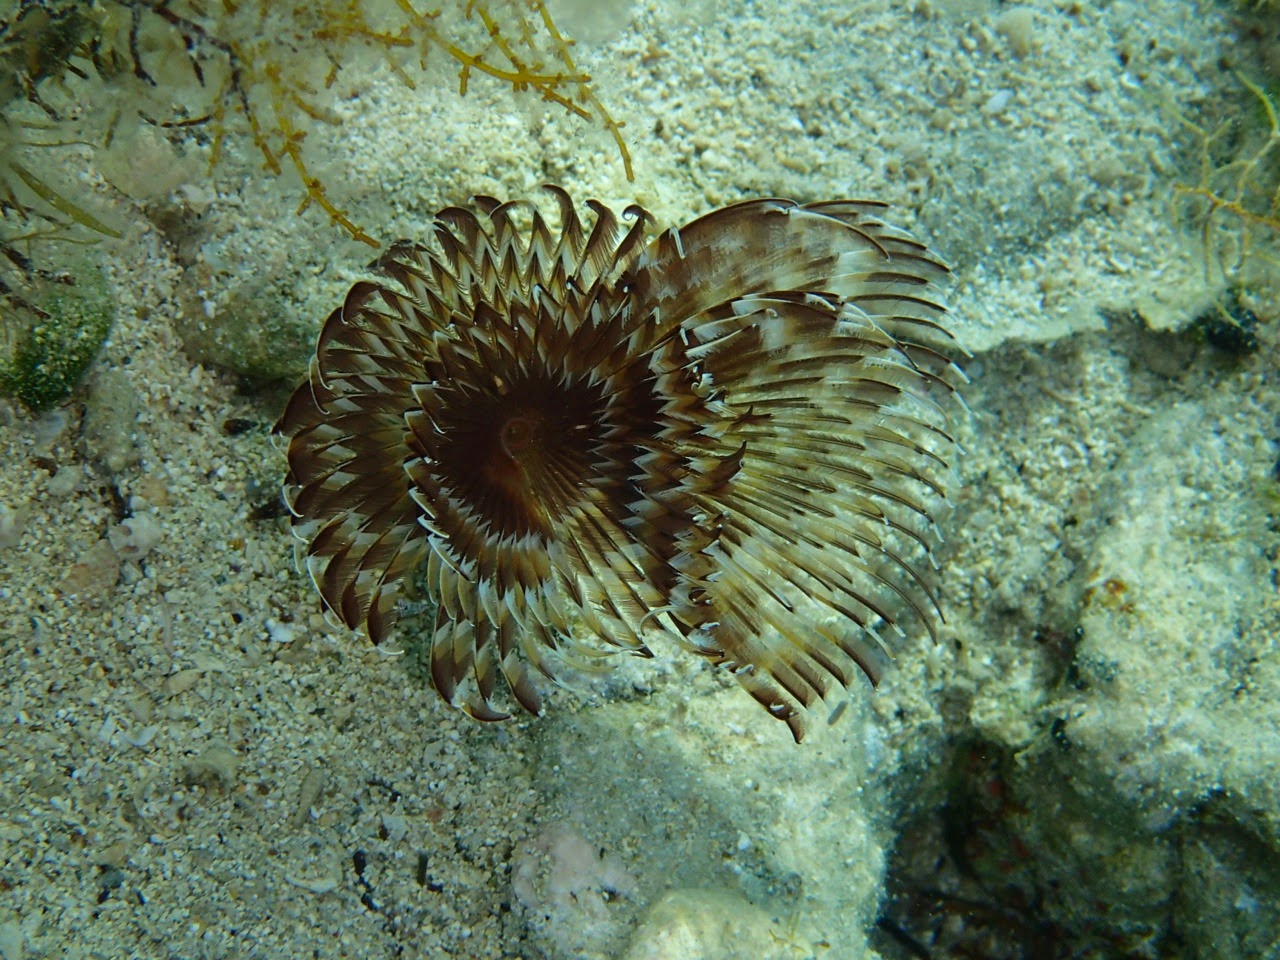 This is one of the Tube worms, the Twin fan worm (Dvoperjaničar).